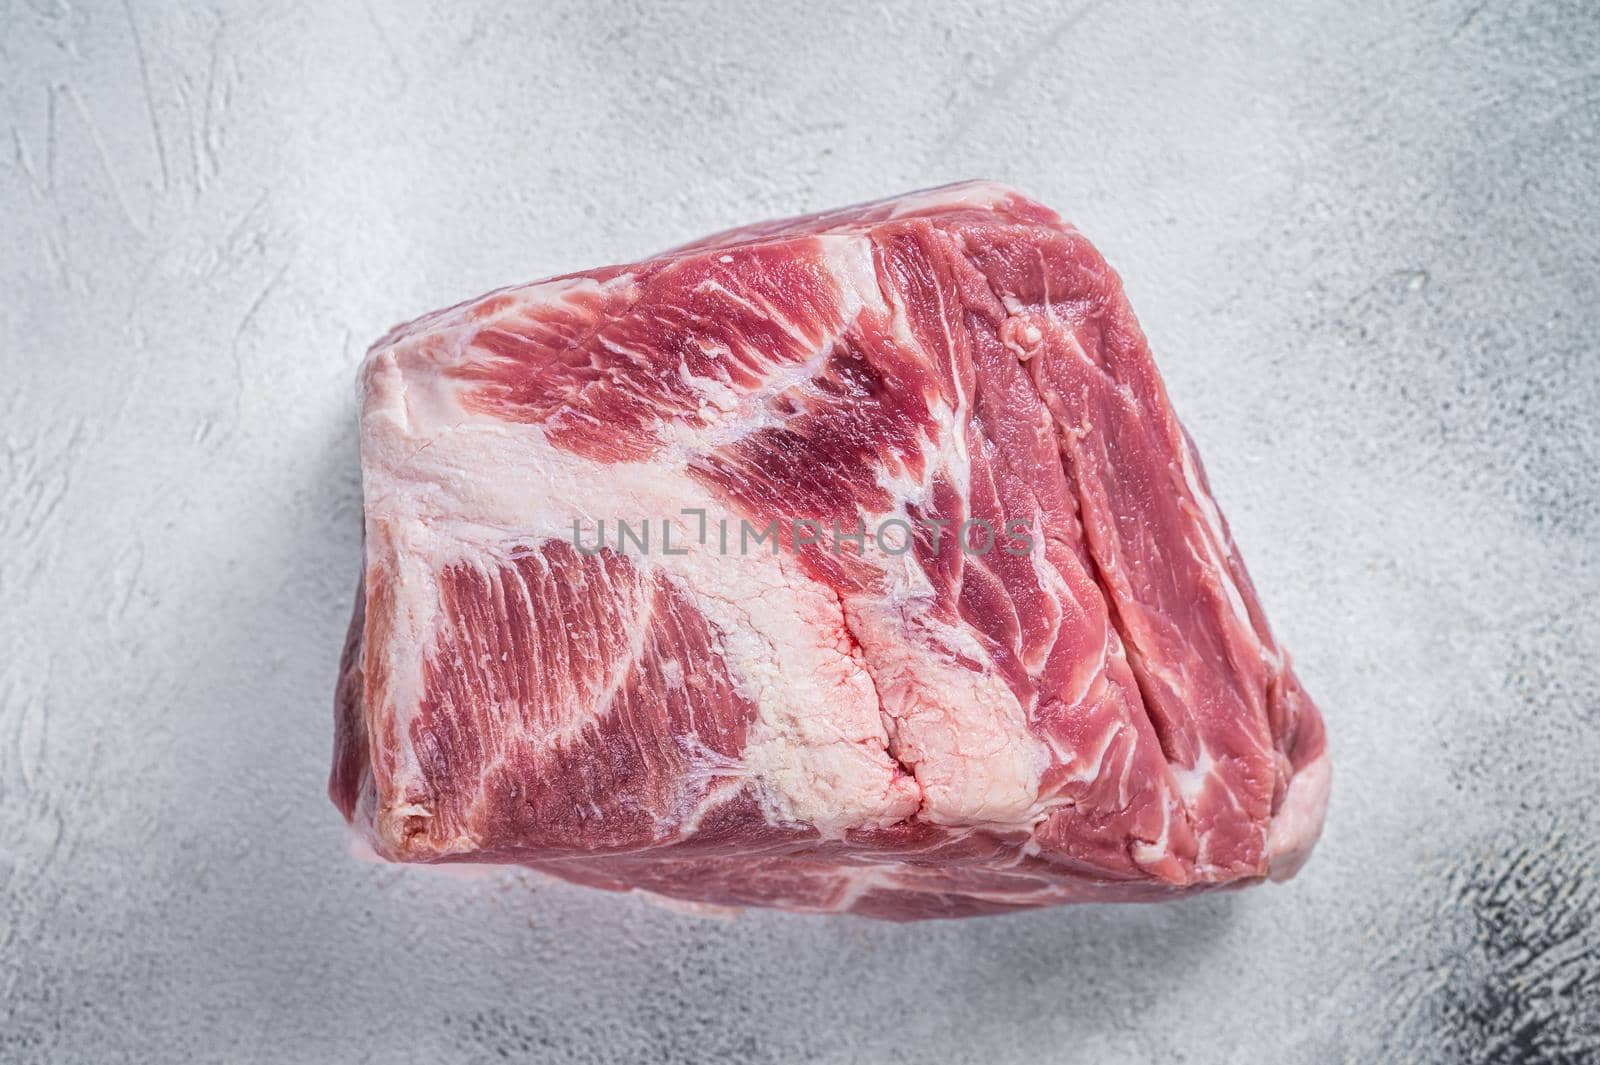 Raw pork neck meat for Chop steak on kichen table. White background. Top view.